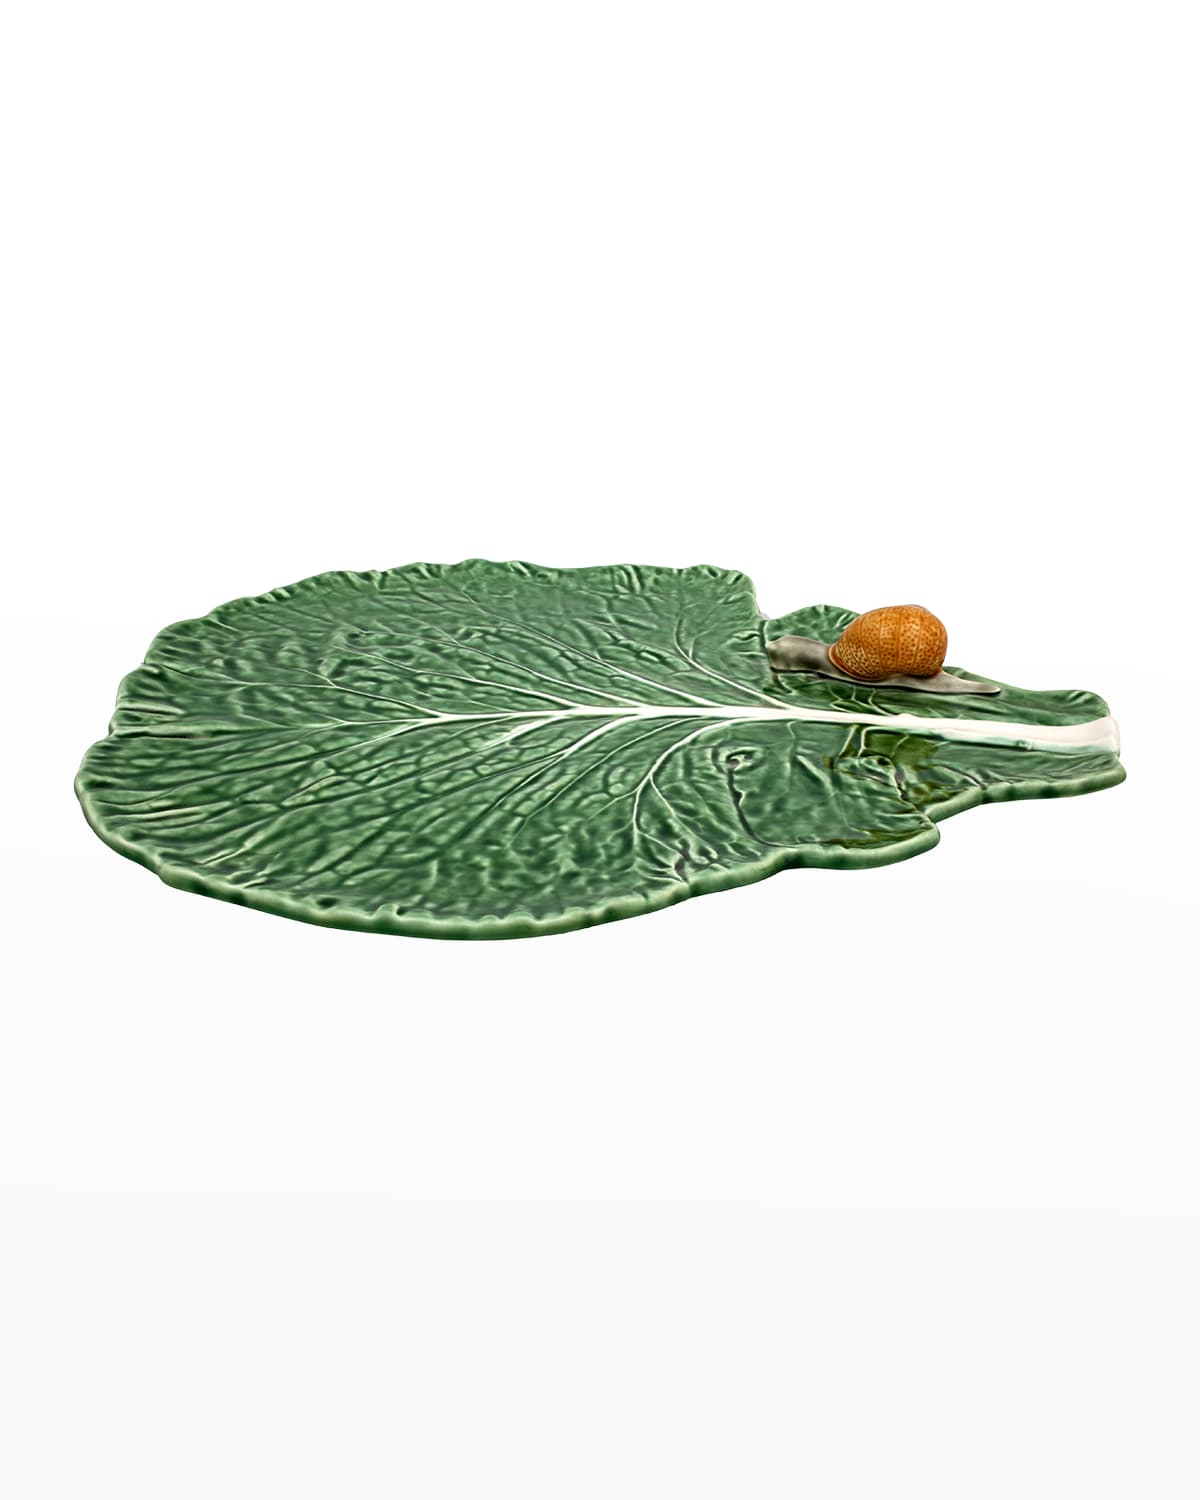 Cabbage Leaf Tray With Snail Green